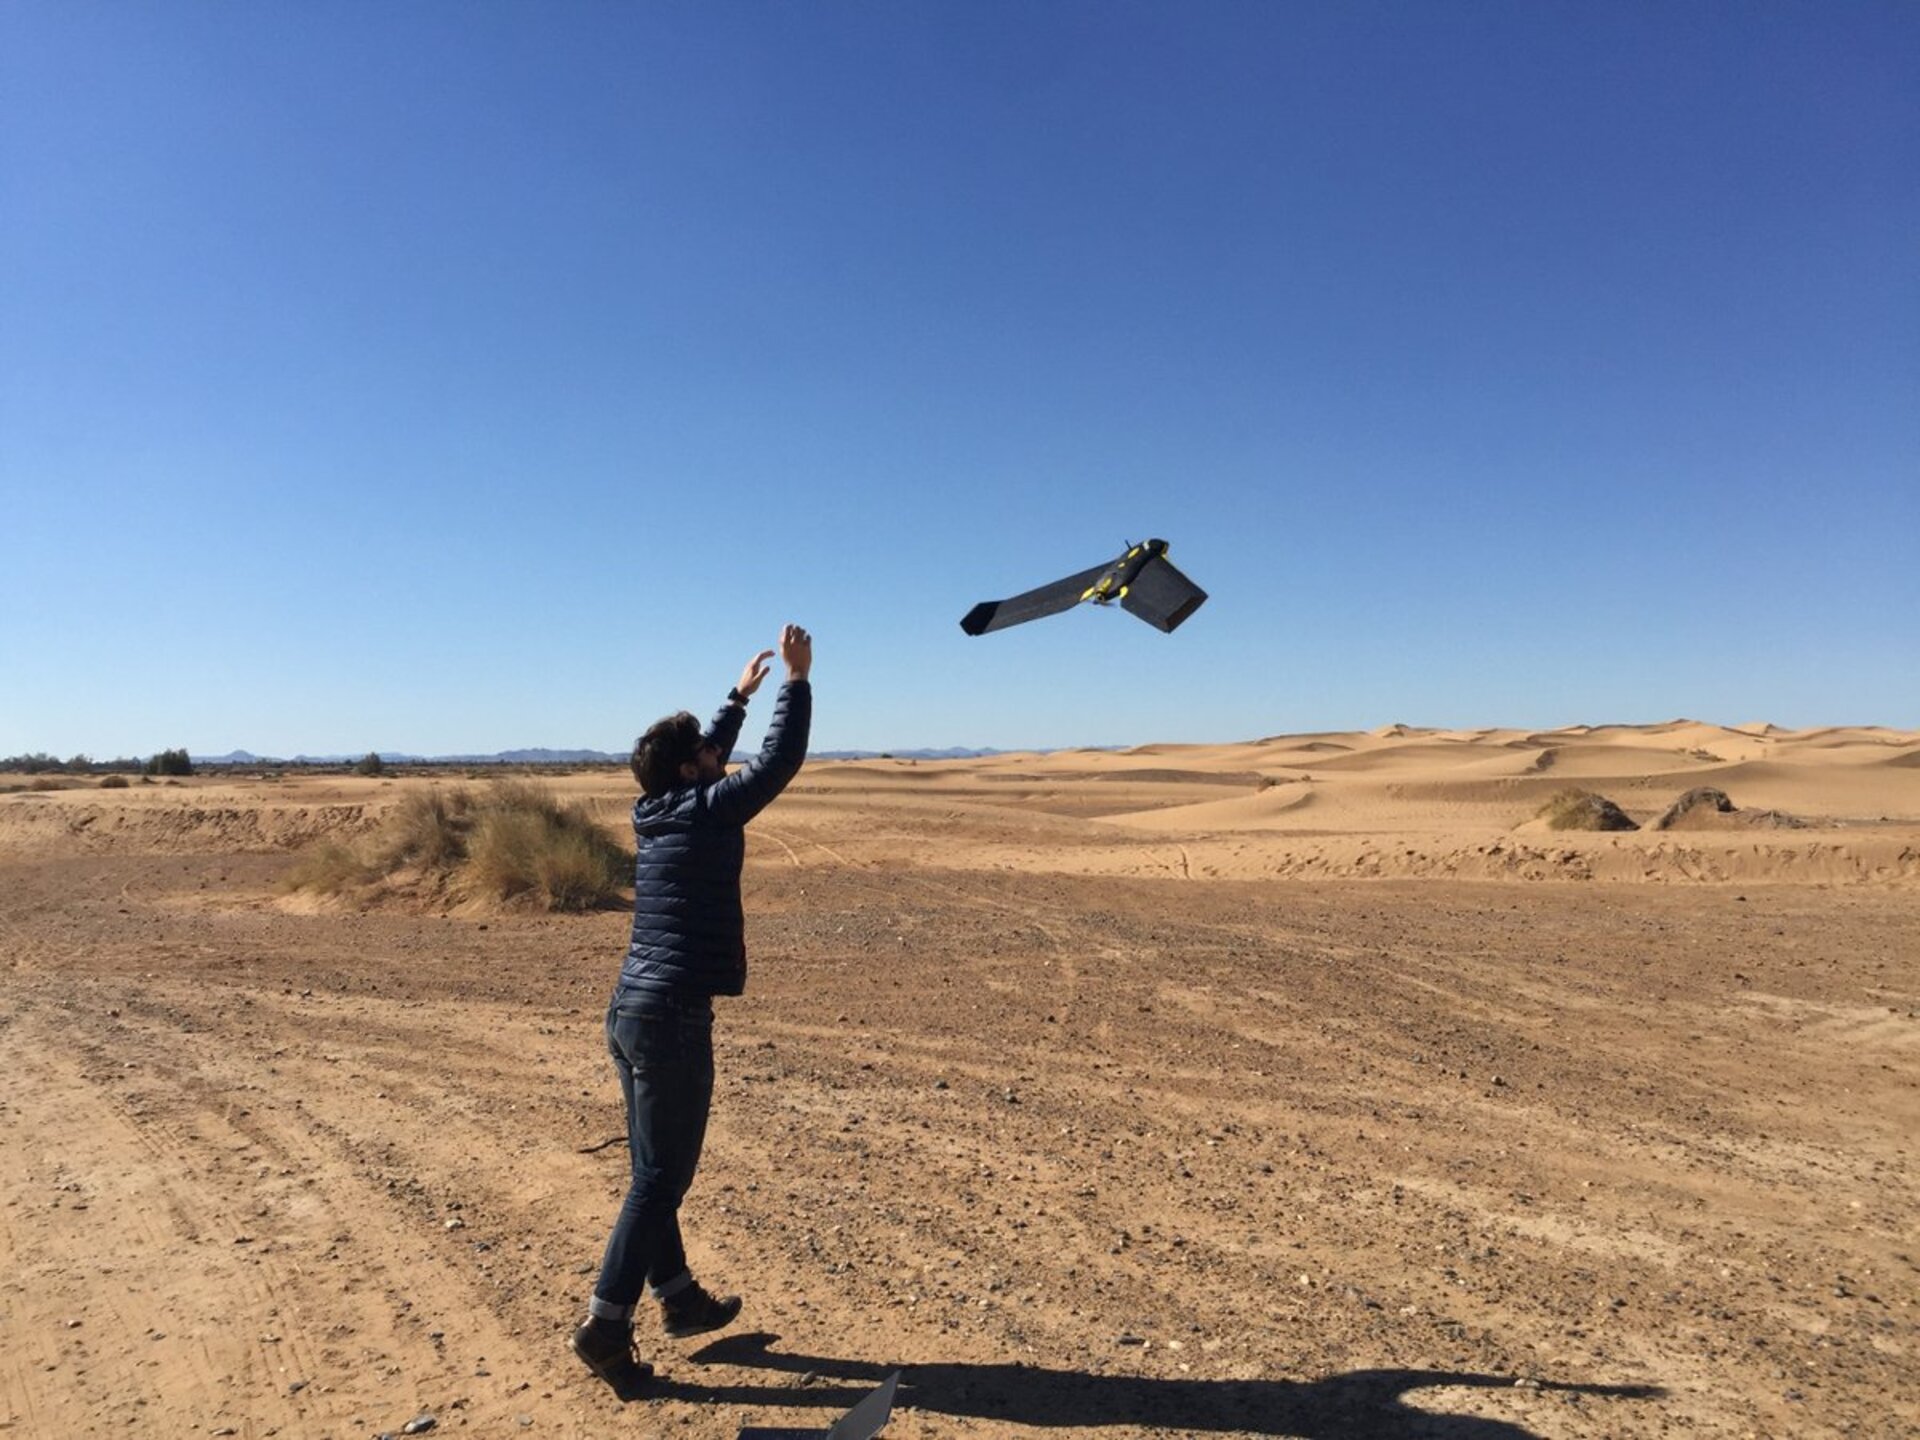 Drone for mapping